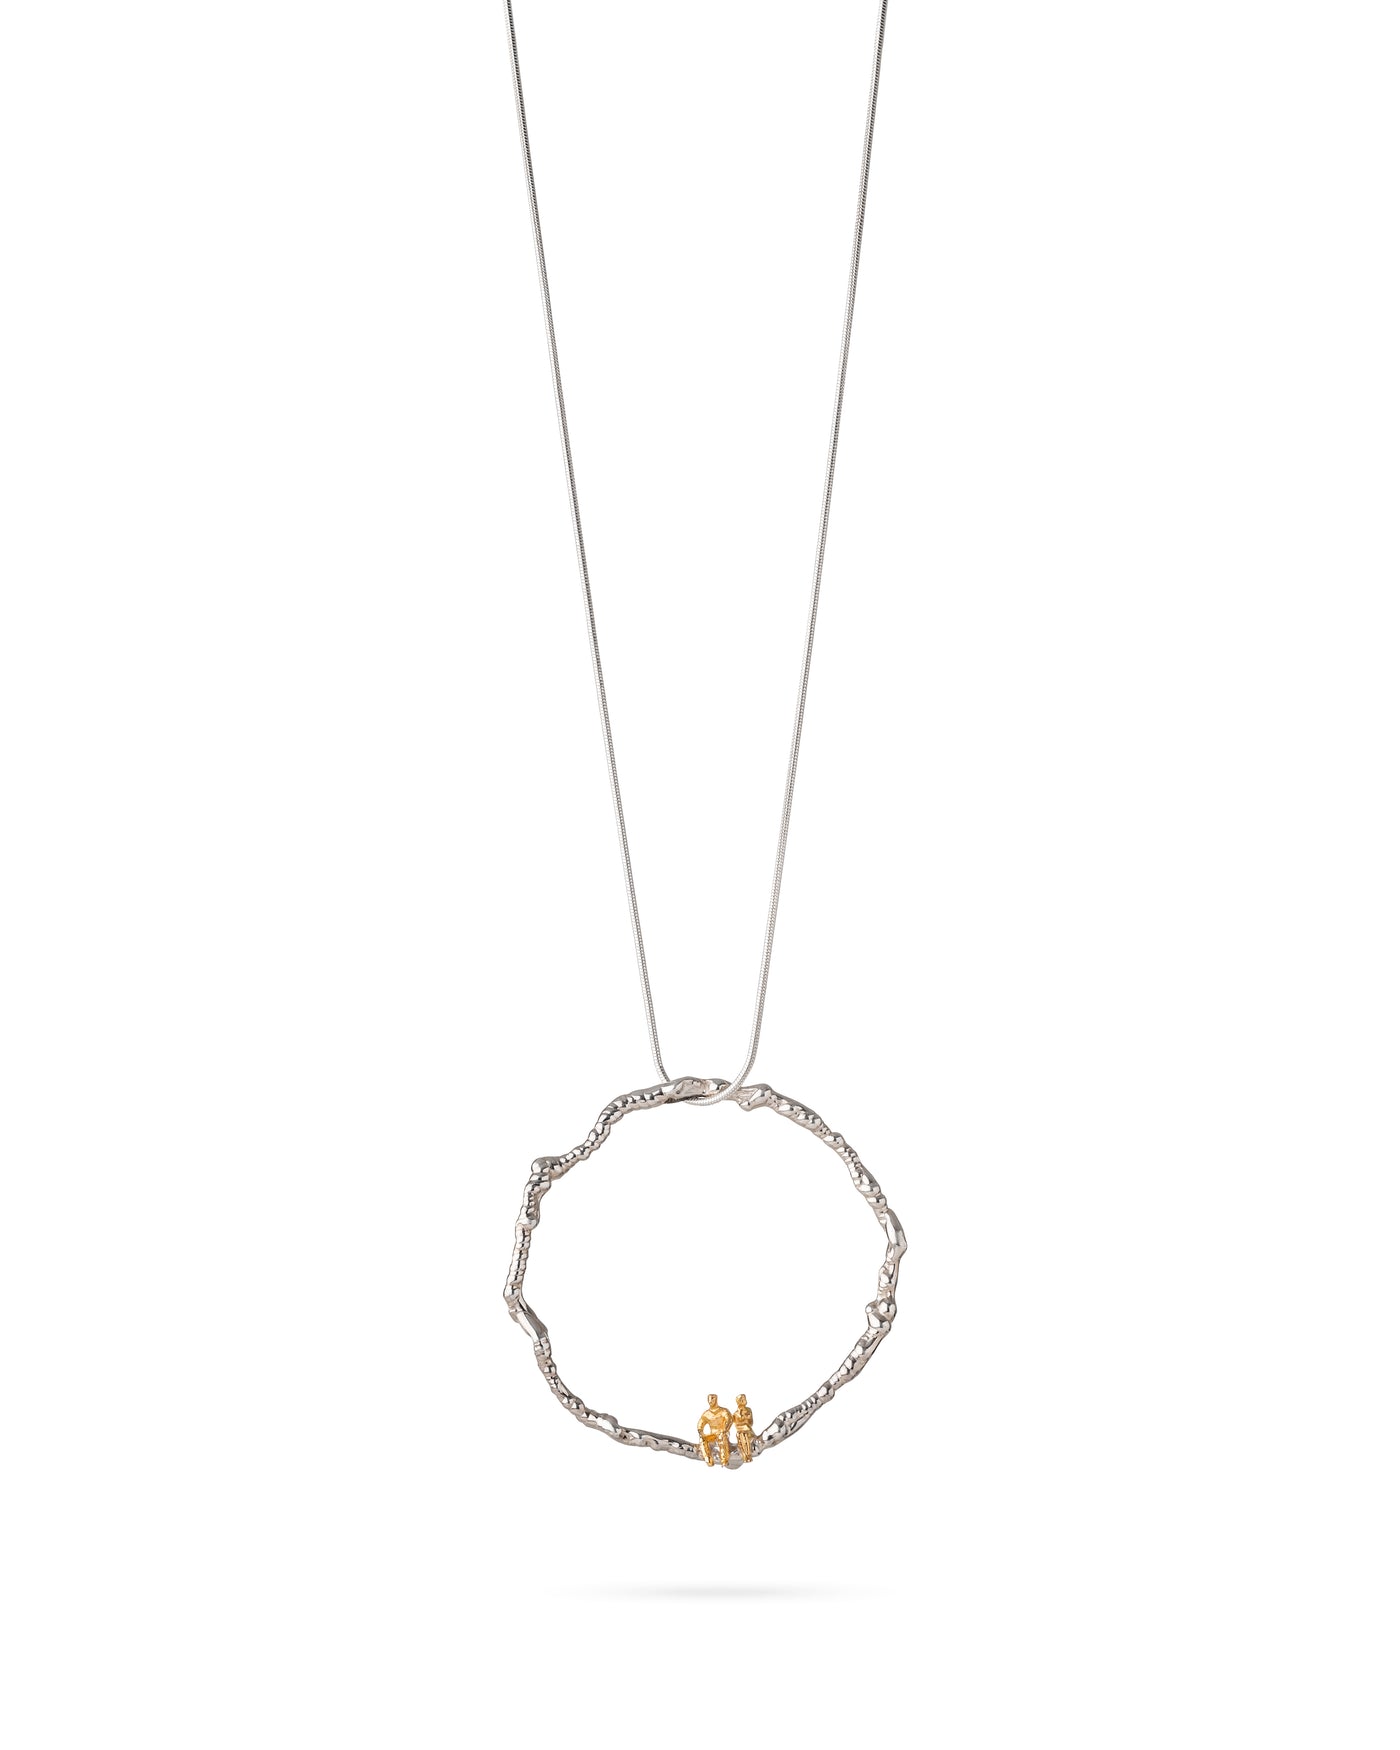 18 k gold and silver necklace "TOGETHER ON THE ROAD"